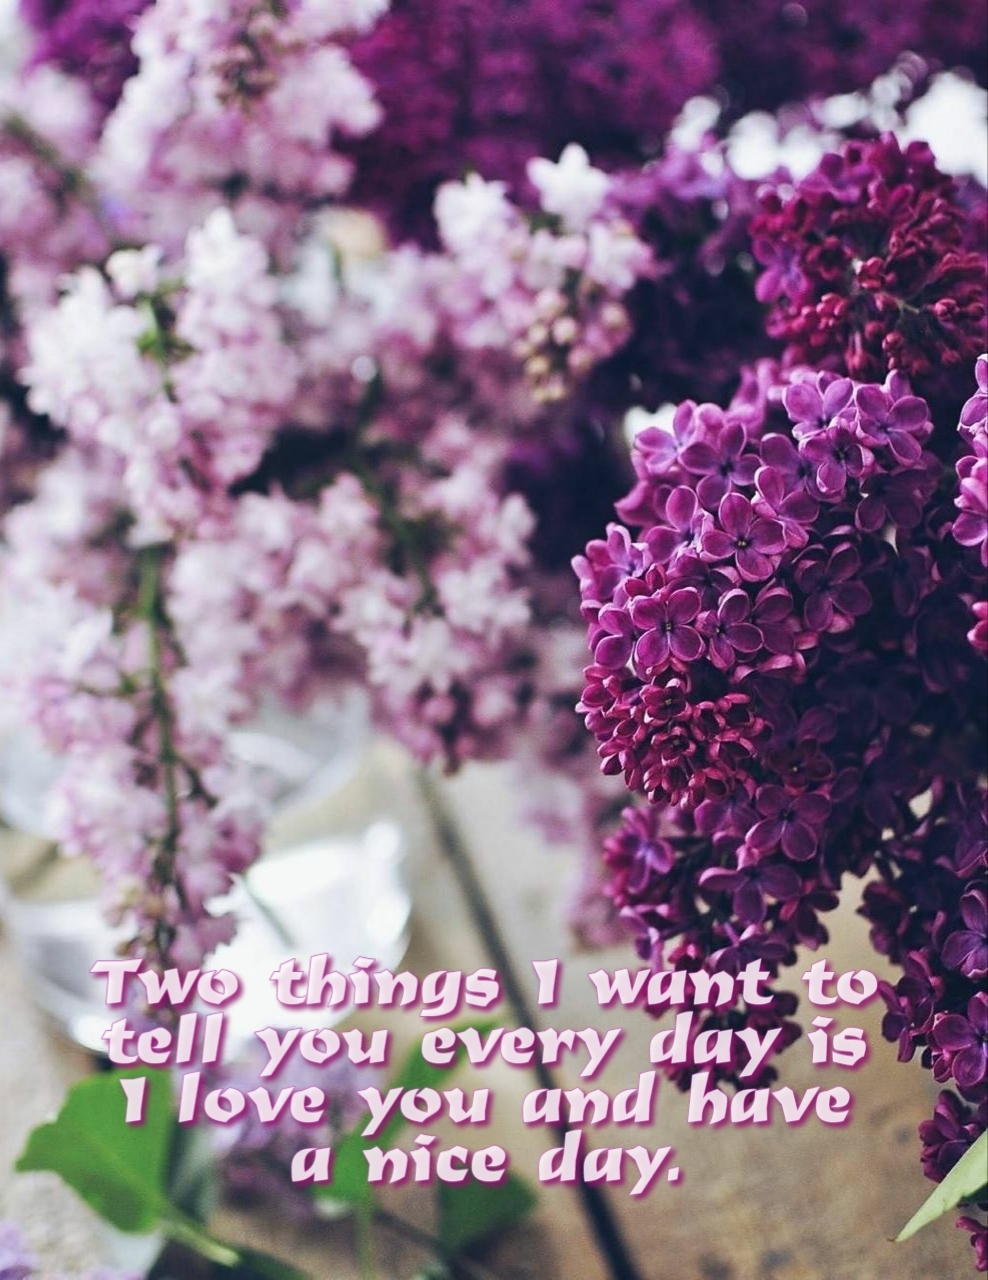 Two things I want to tell you every day is I love you